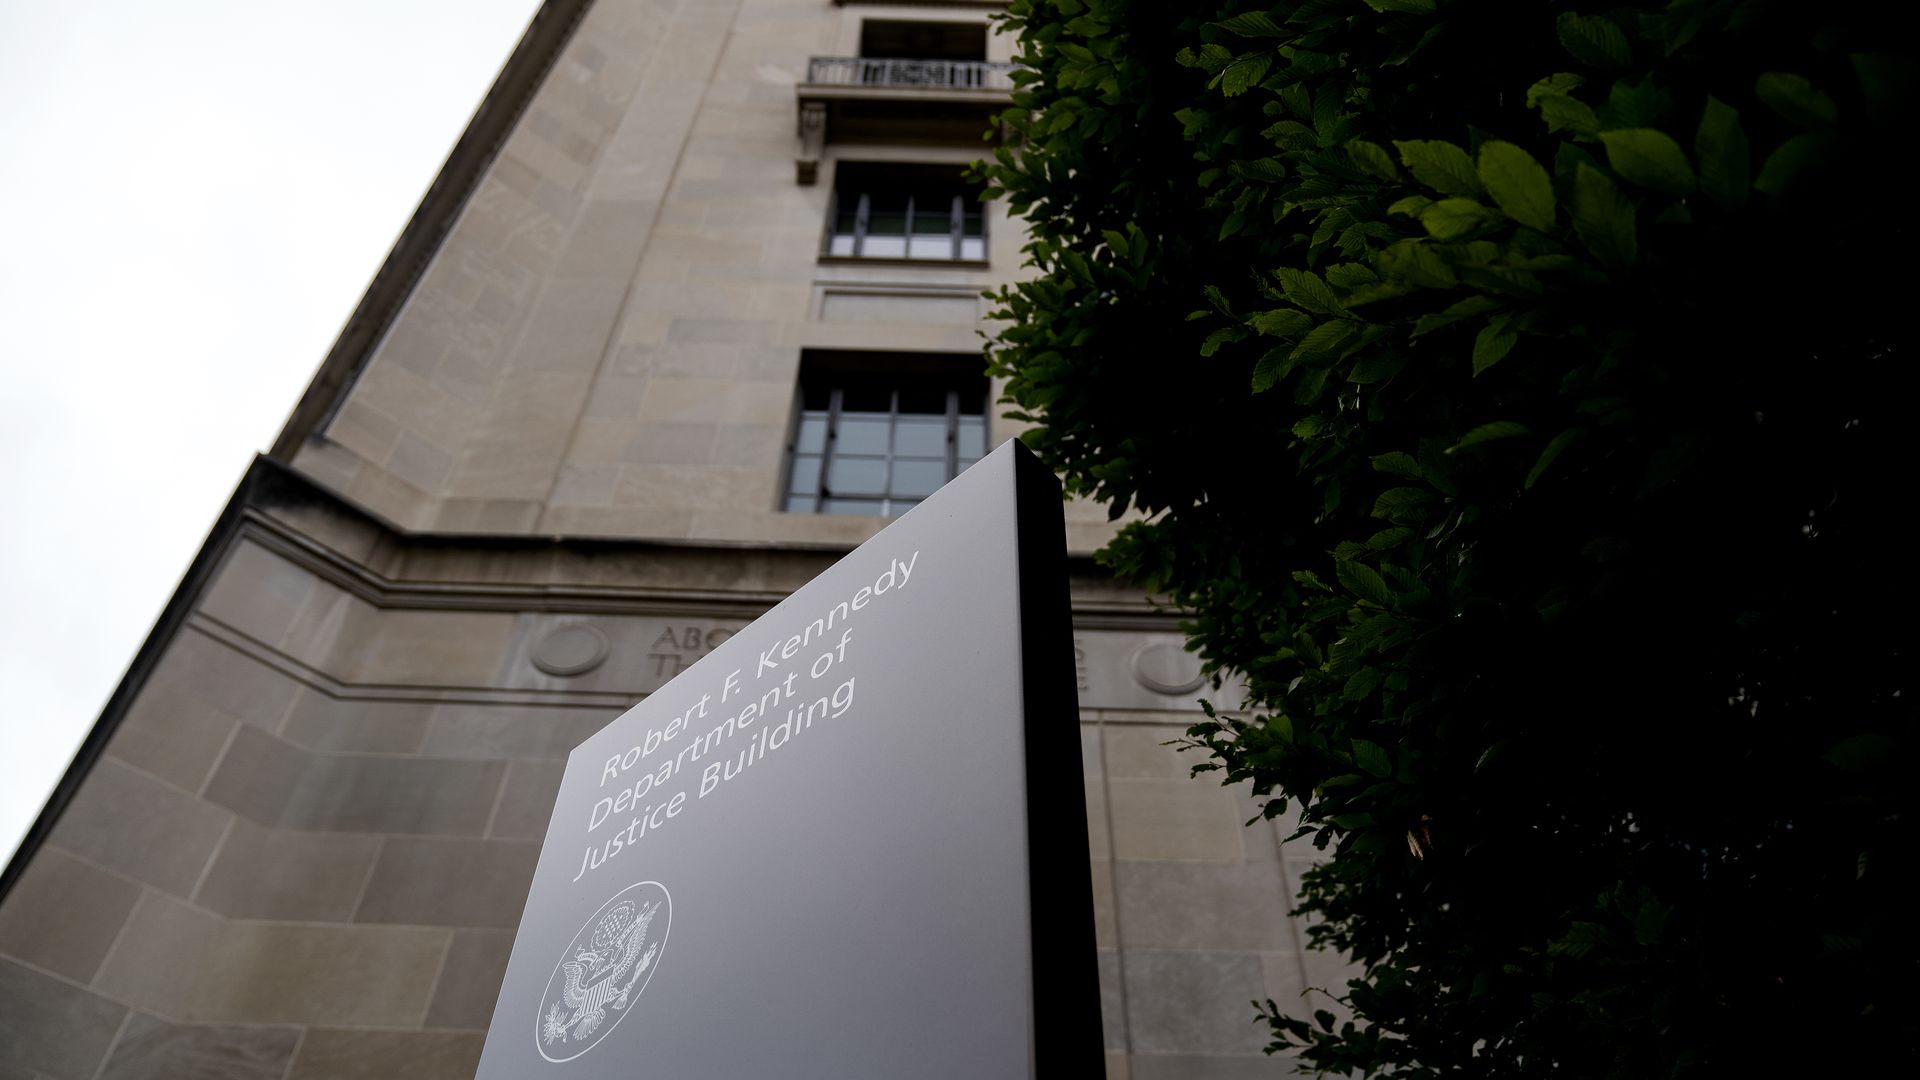 Photo of a sign that says "Robert F. Kennedy Department of Justice Building" outside the DOJ building